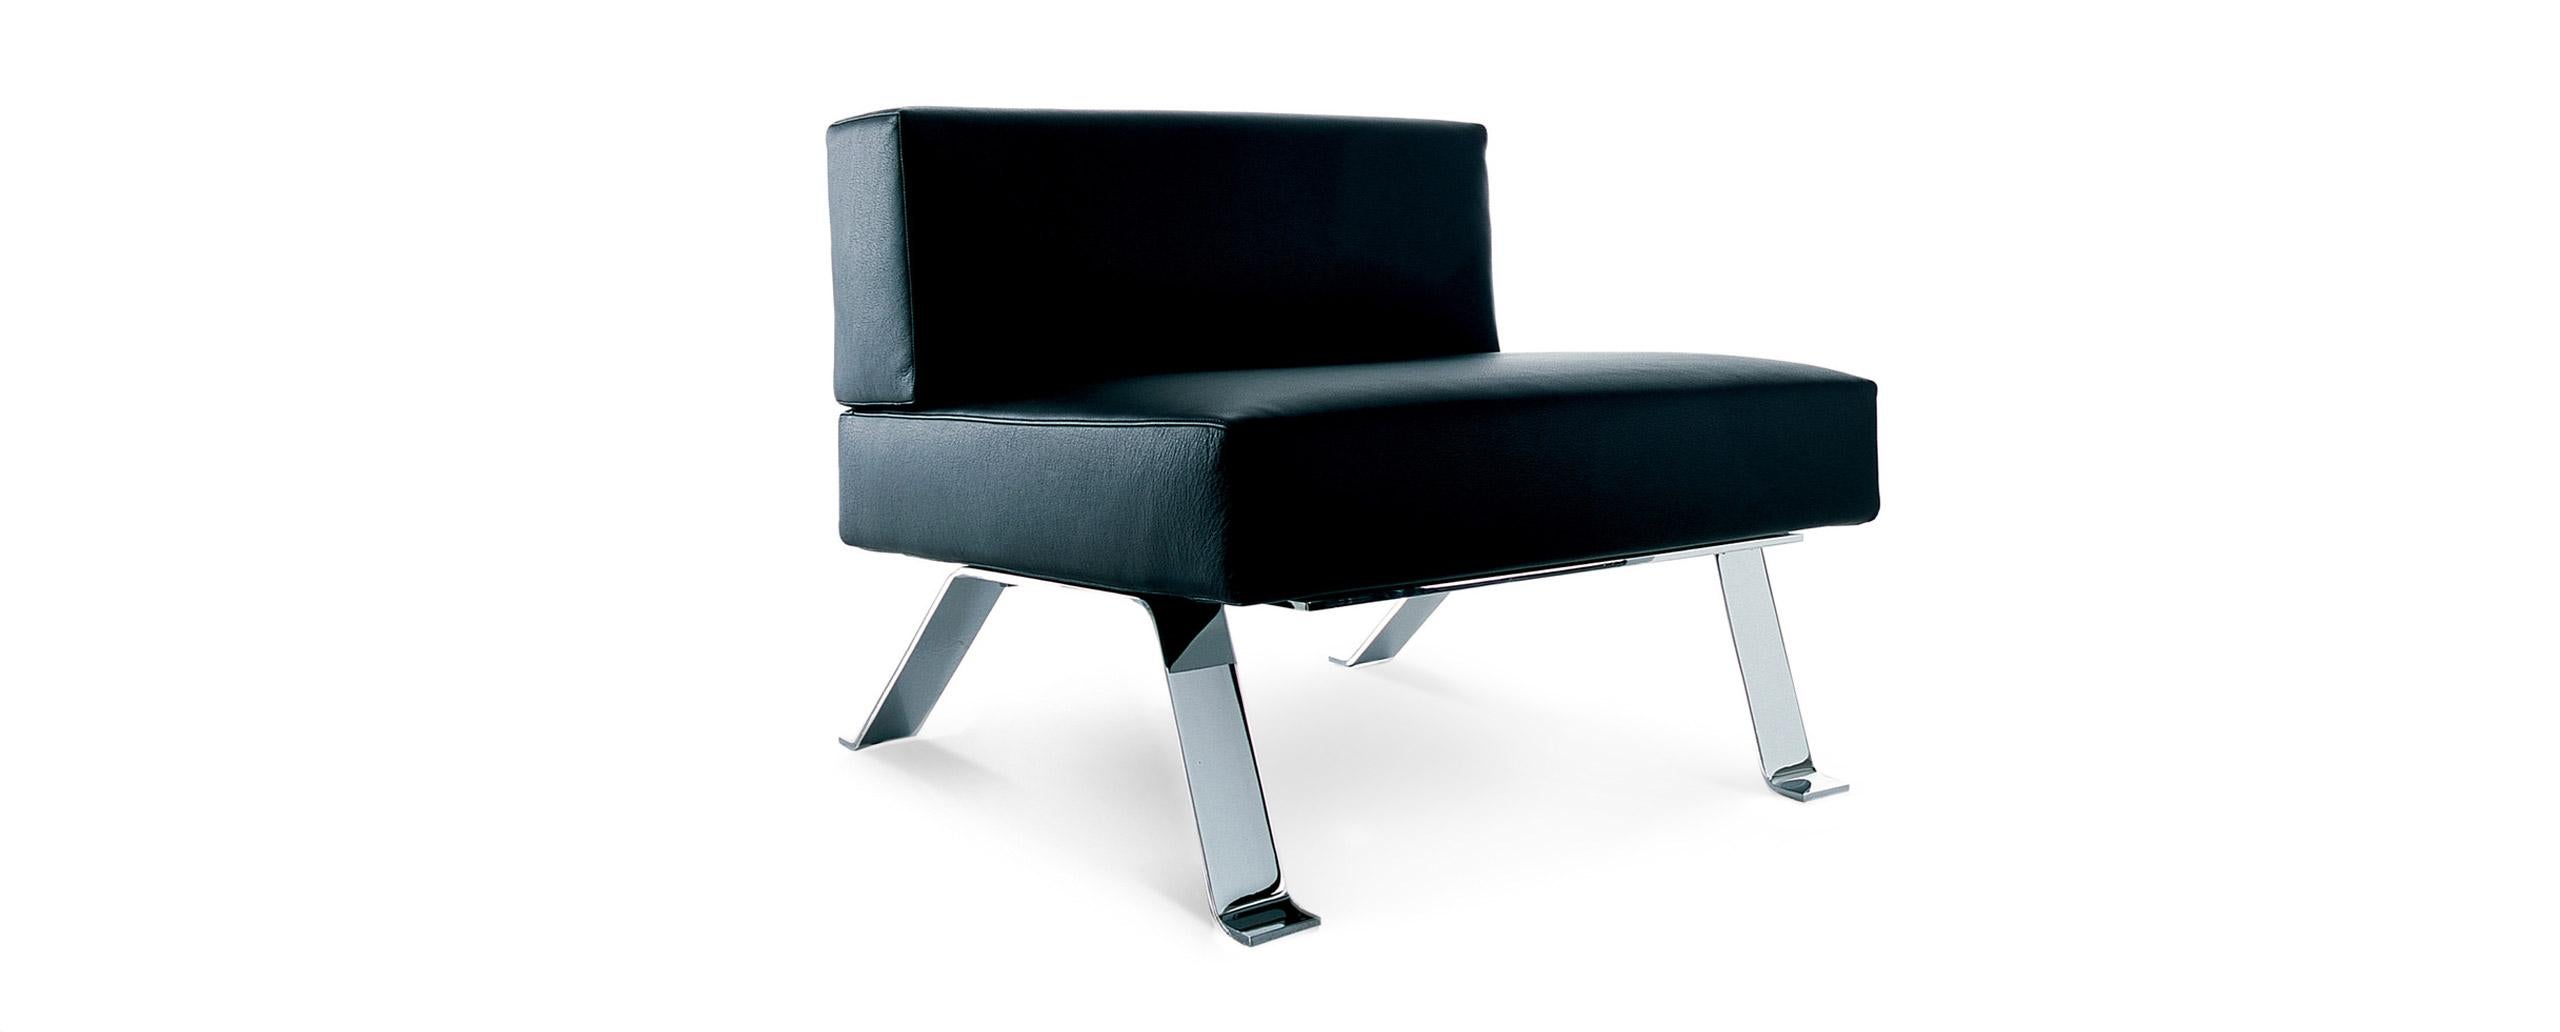 Contemporary Charlotte Perriand Ombra Easychair by Cassina For Sale